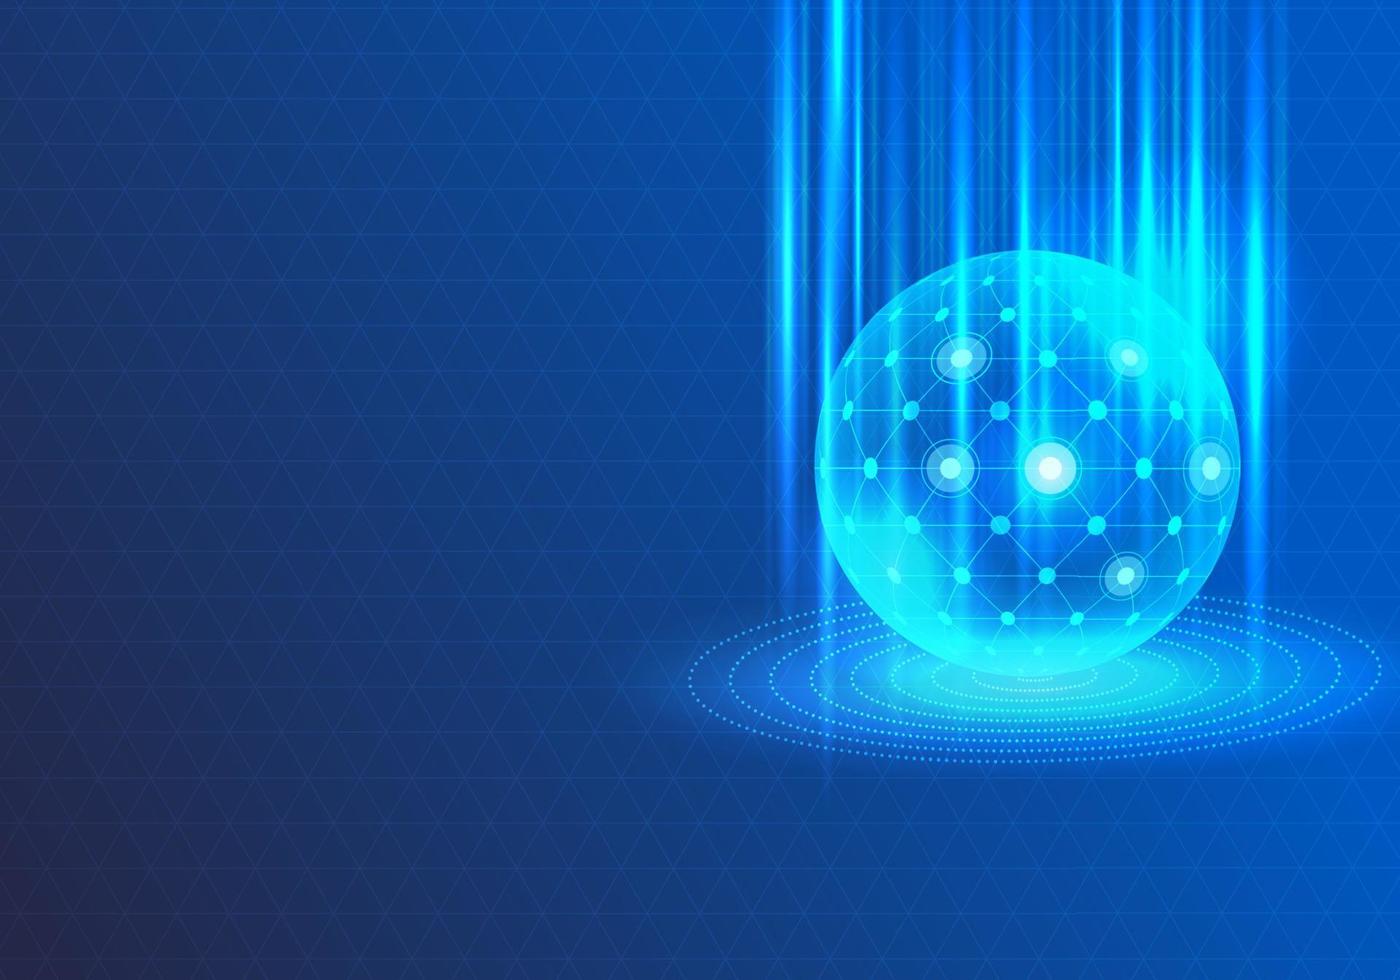 Technology processor background It is a glowing blue sphere with lines connecting artificial intelligence technology within the circle. acts like a brain vector